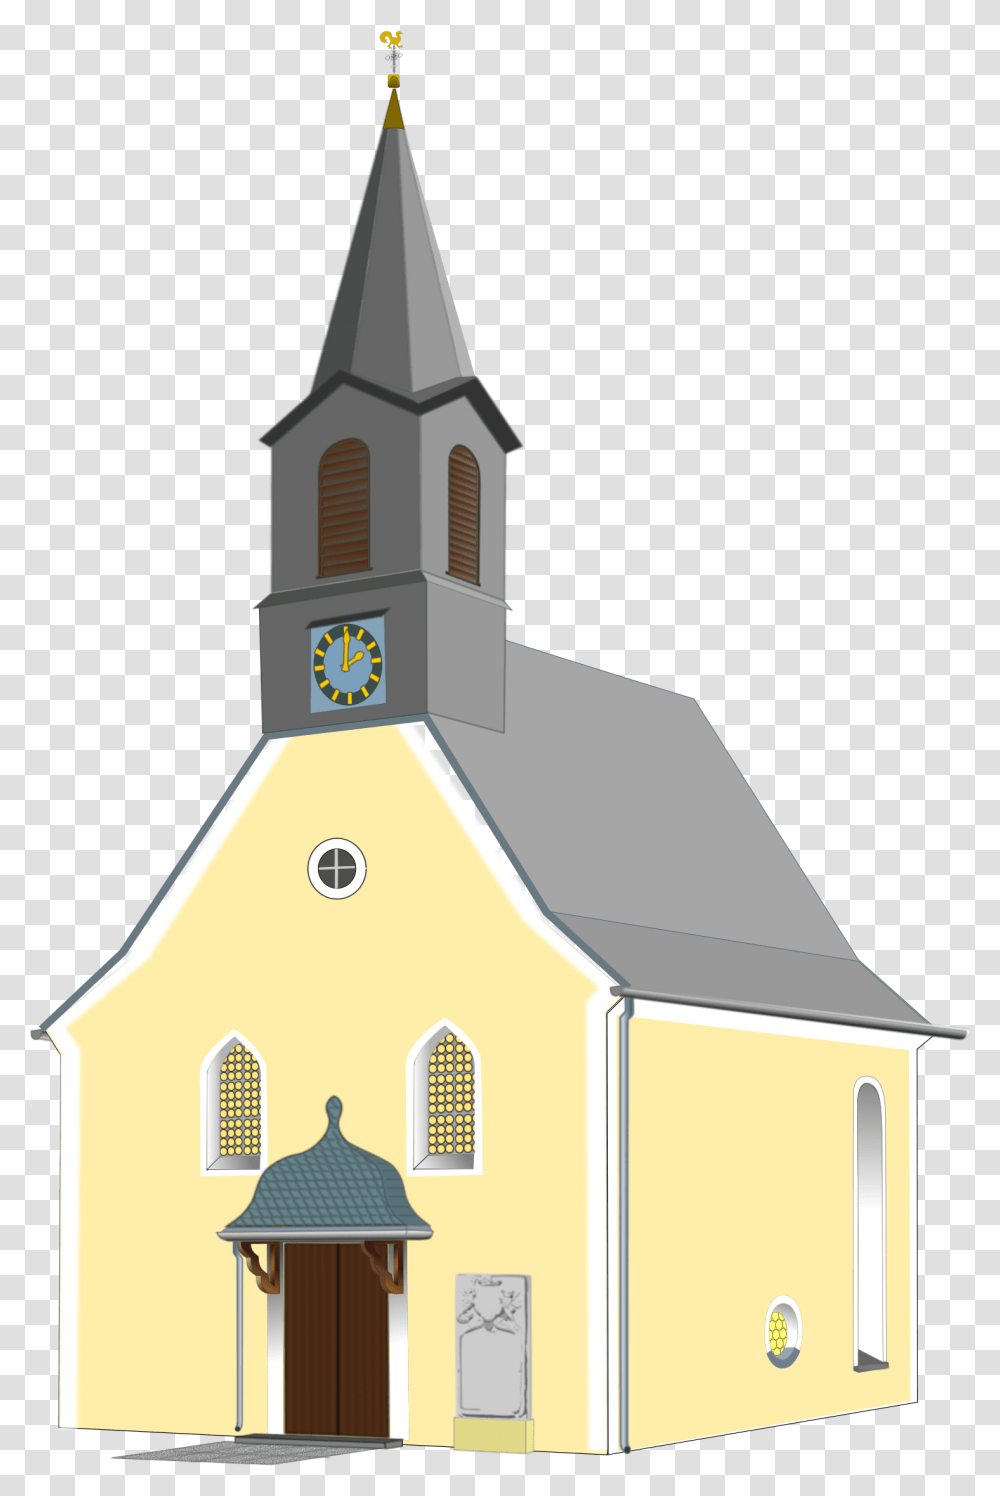 Building Church Background Church, Architecture, Spire, Tower, Steeple Transparent Png